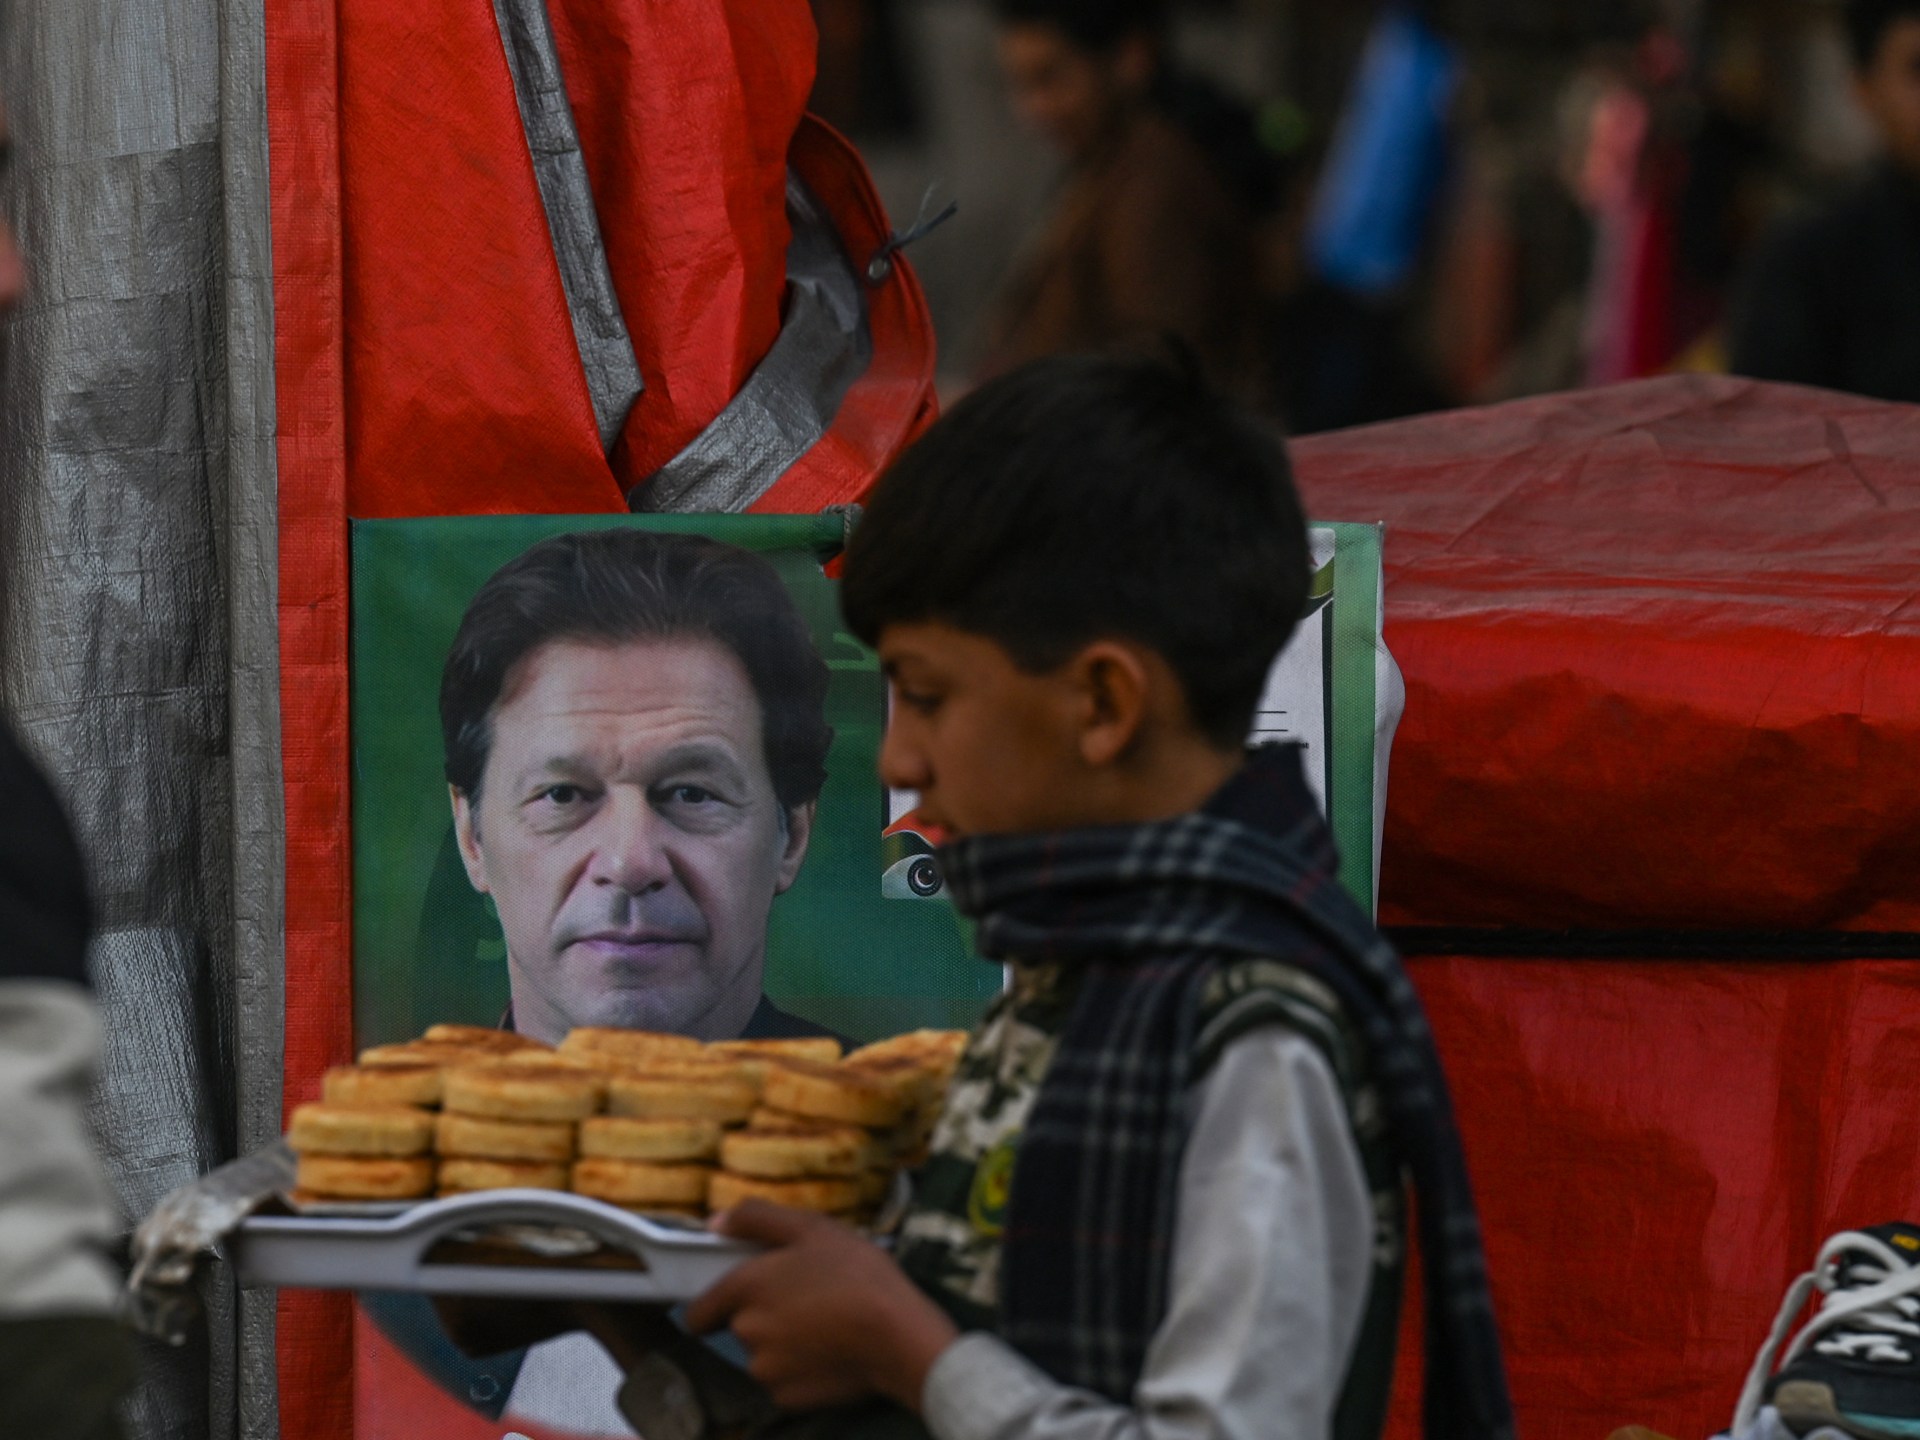 PTI-linked independents take Pakistan election lead as counting nears end | Elections News